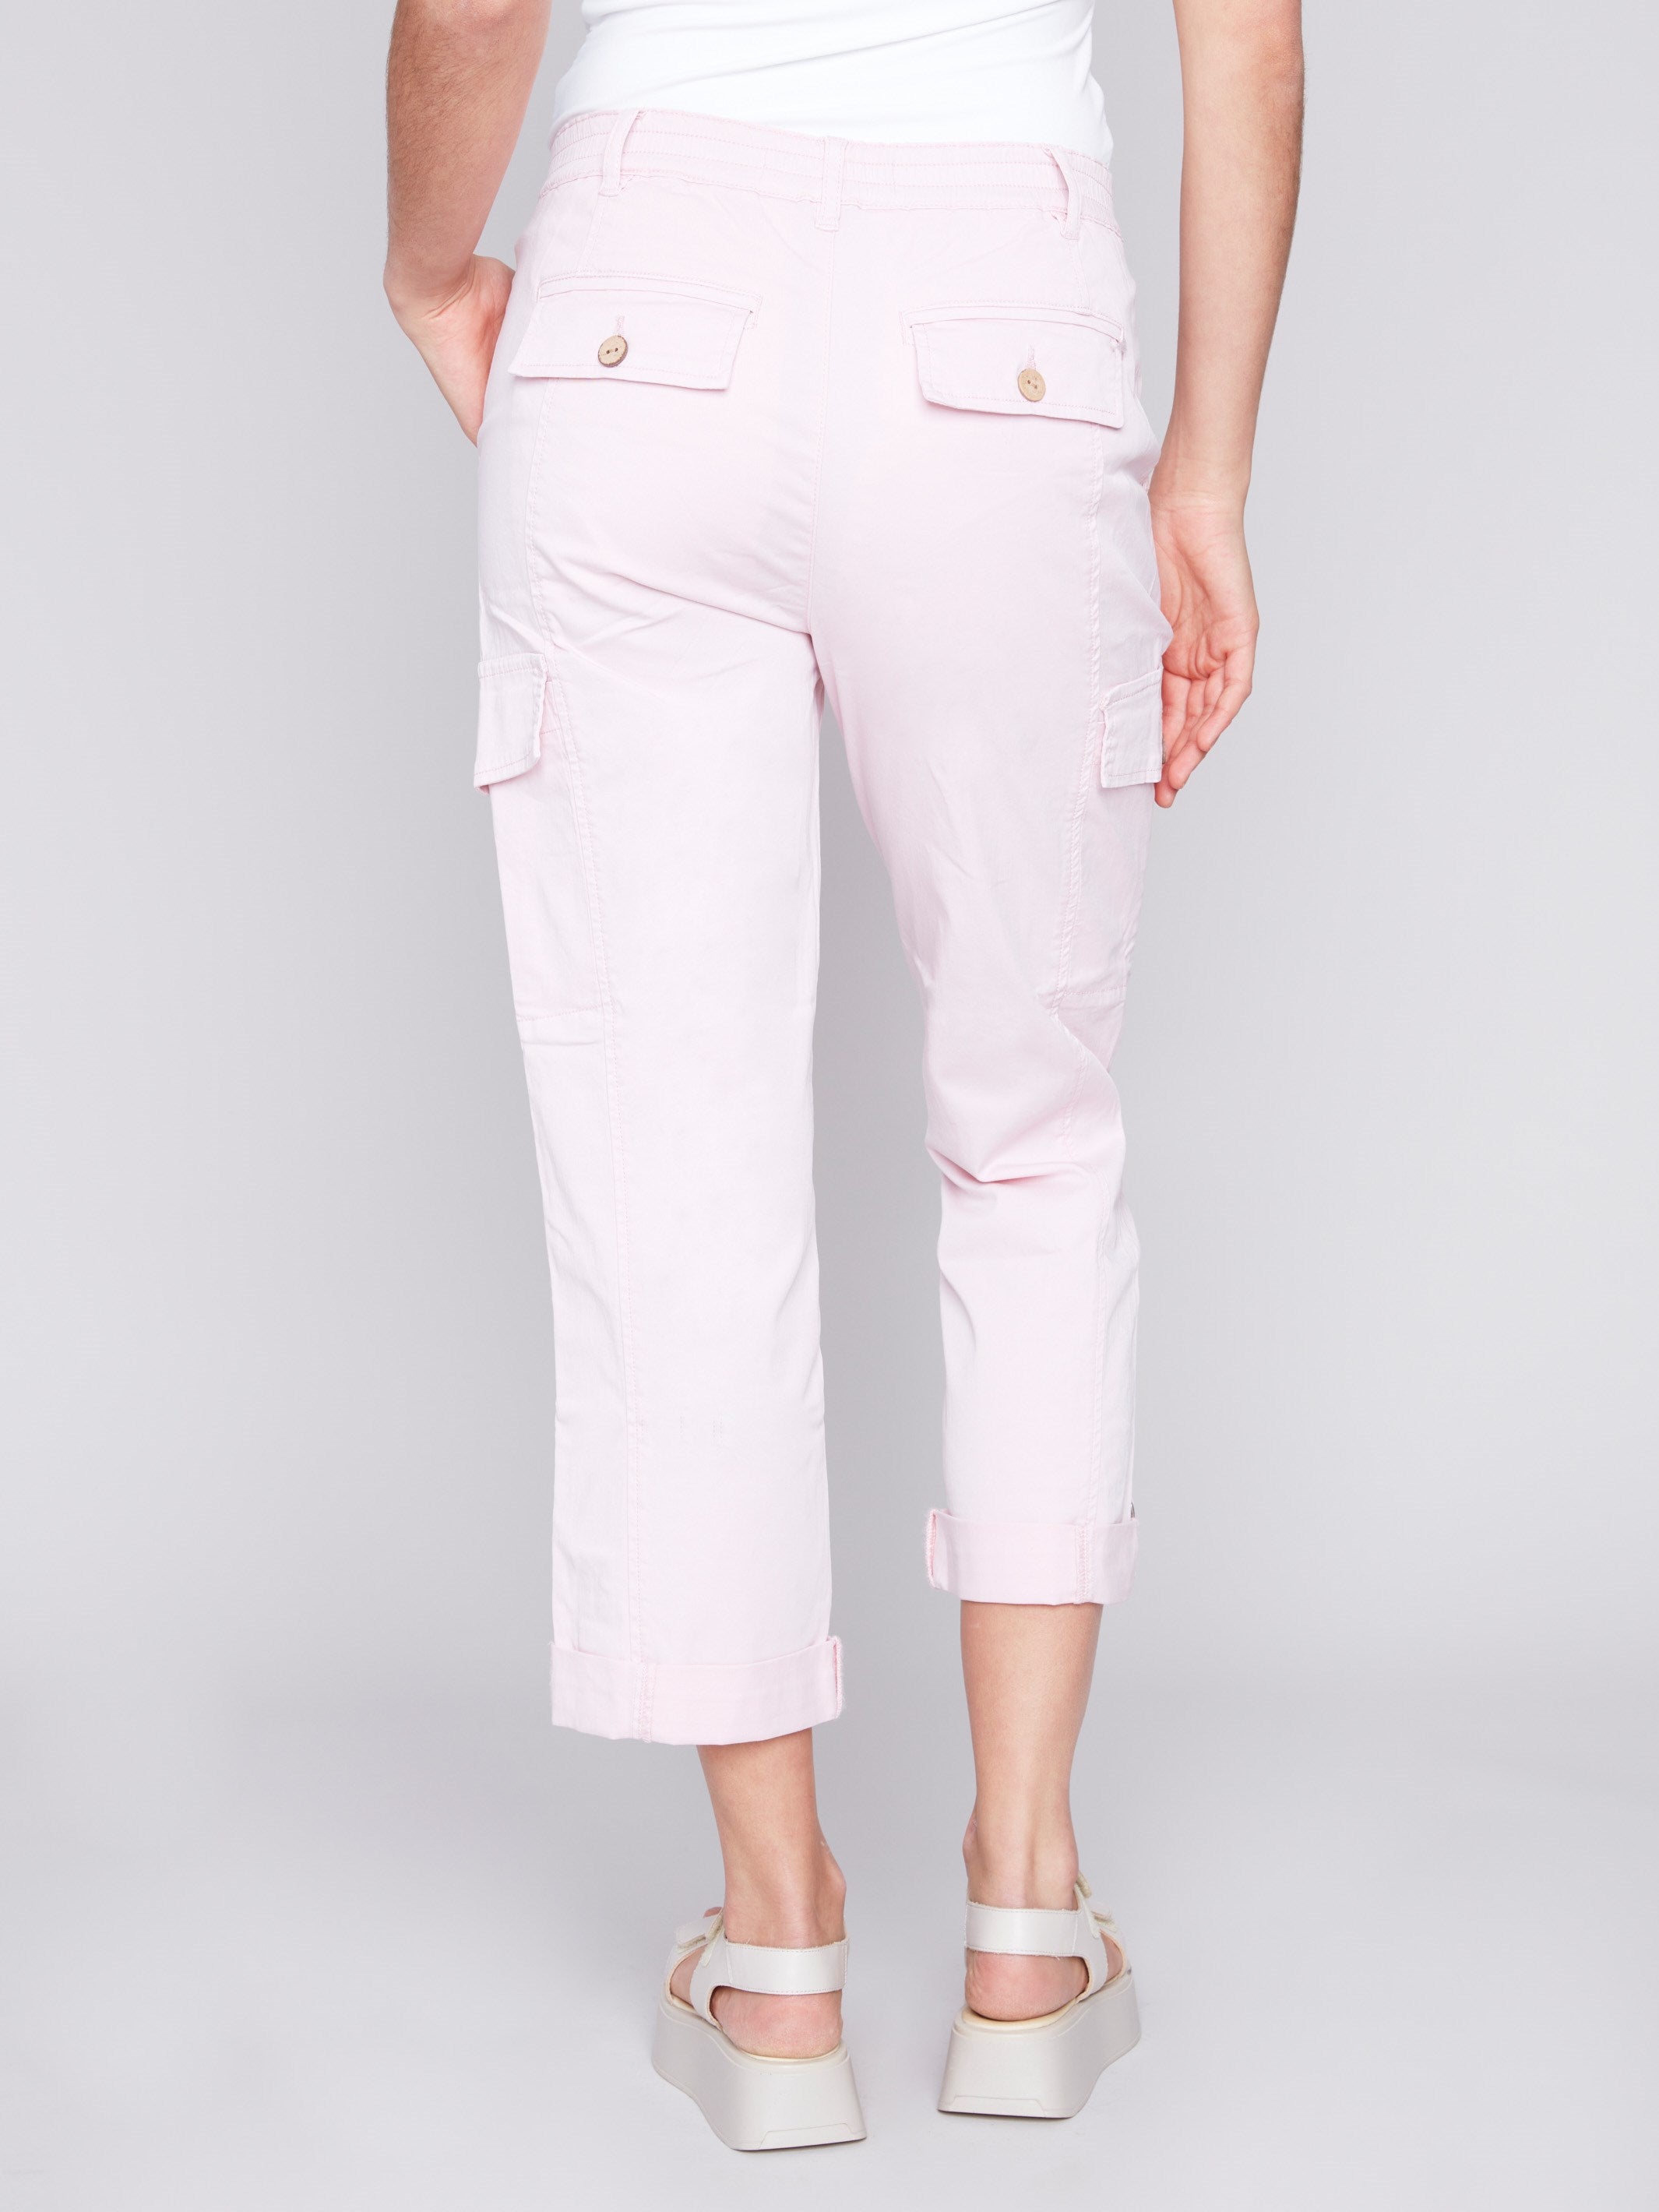 Cotton Canvas Cargo Pants - Lotus - Charlie B Collection Canada - Image 3